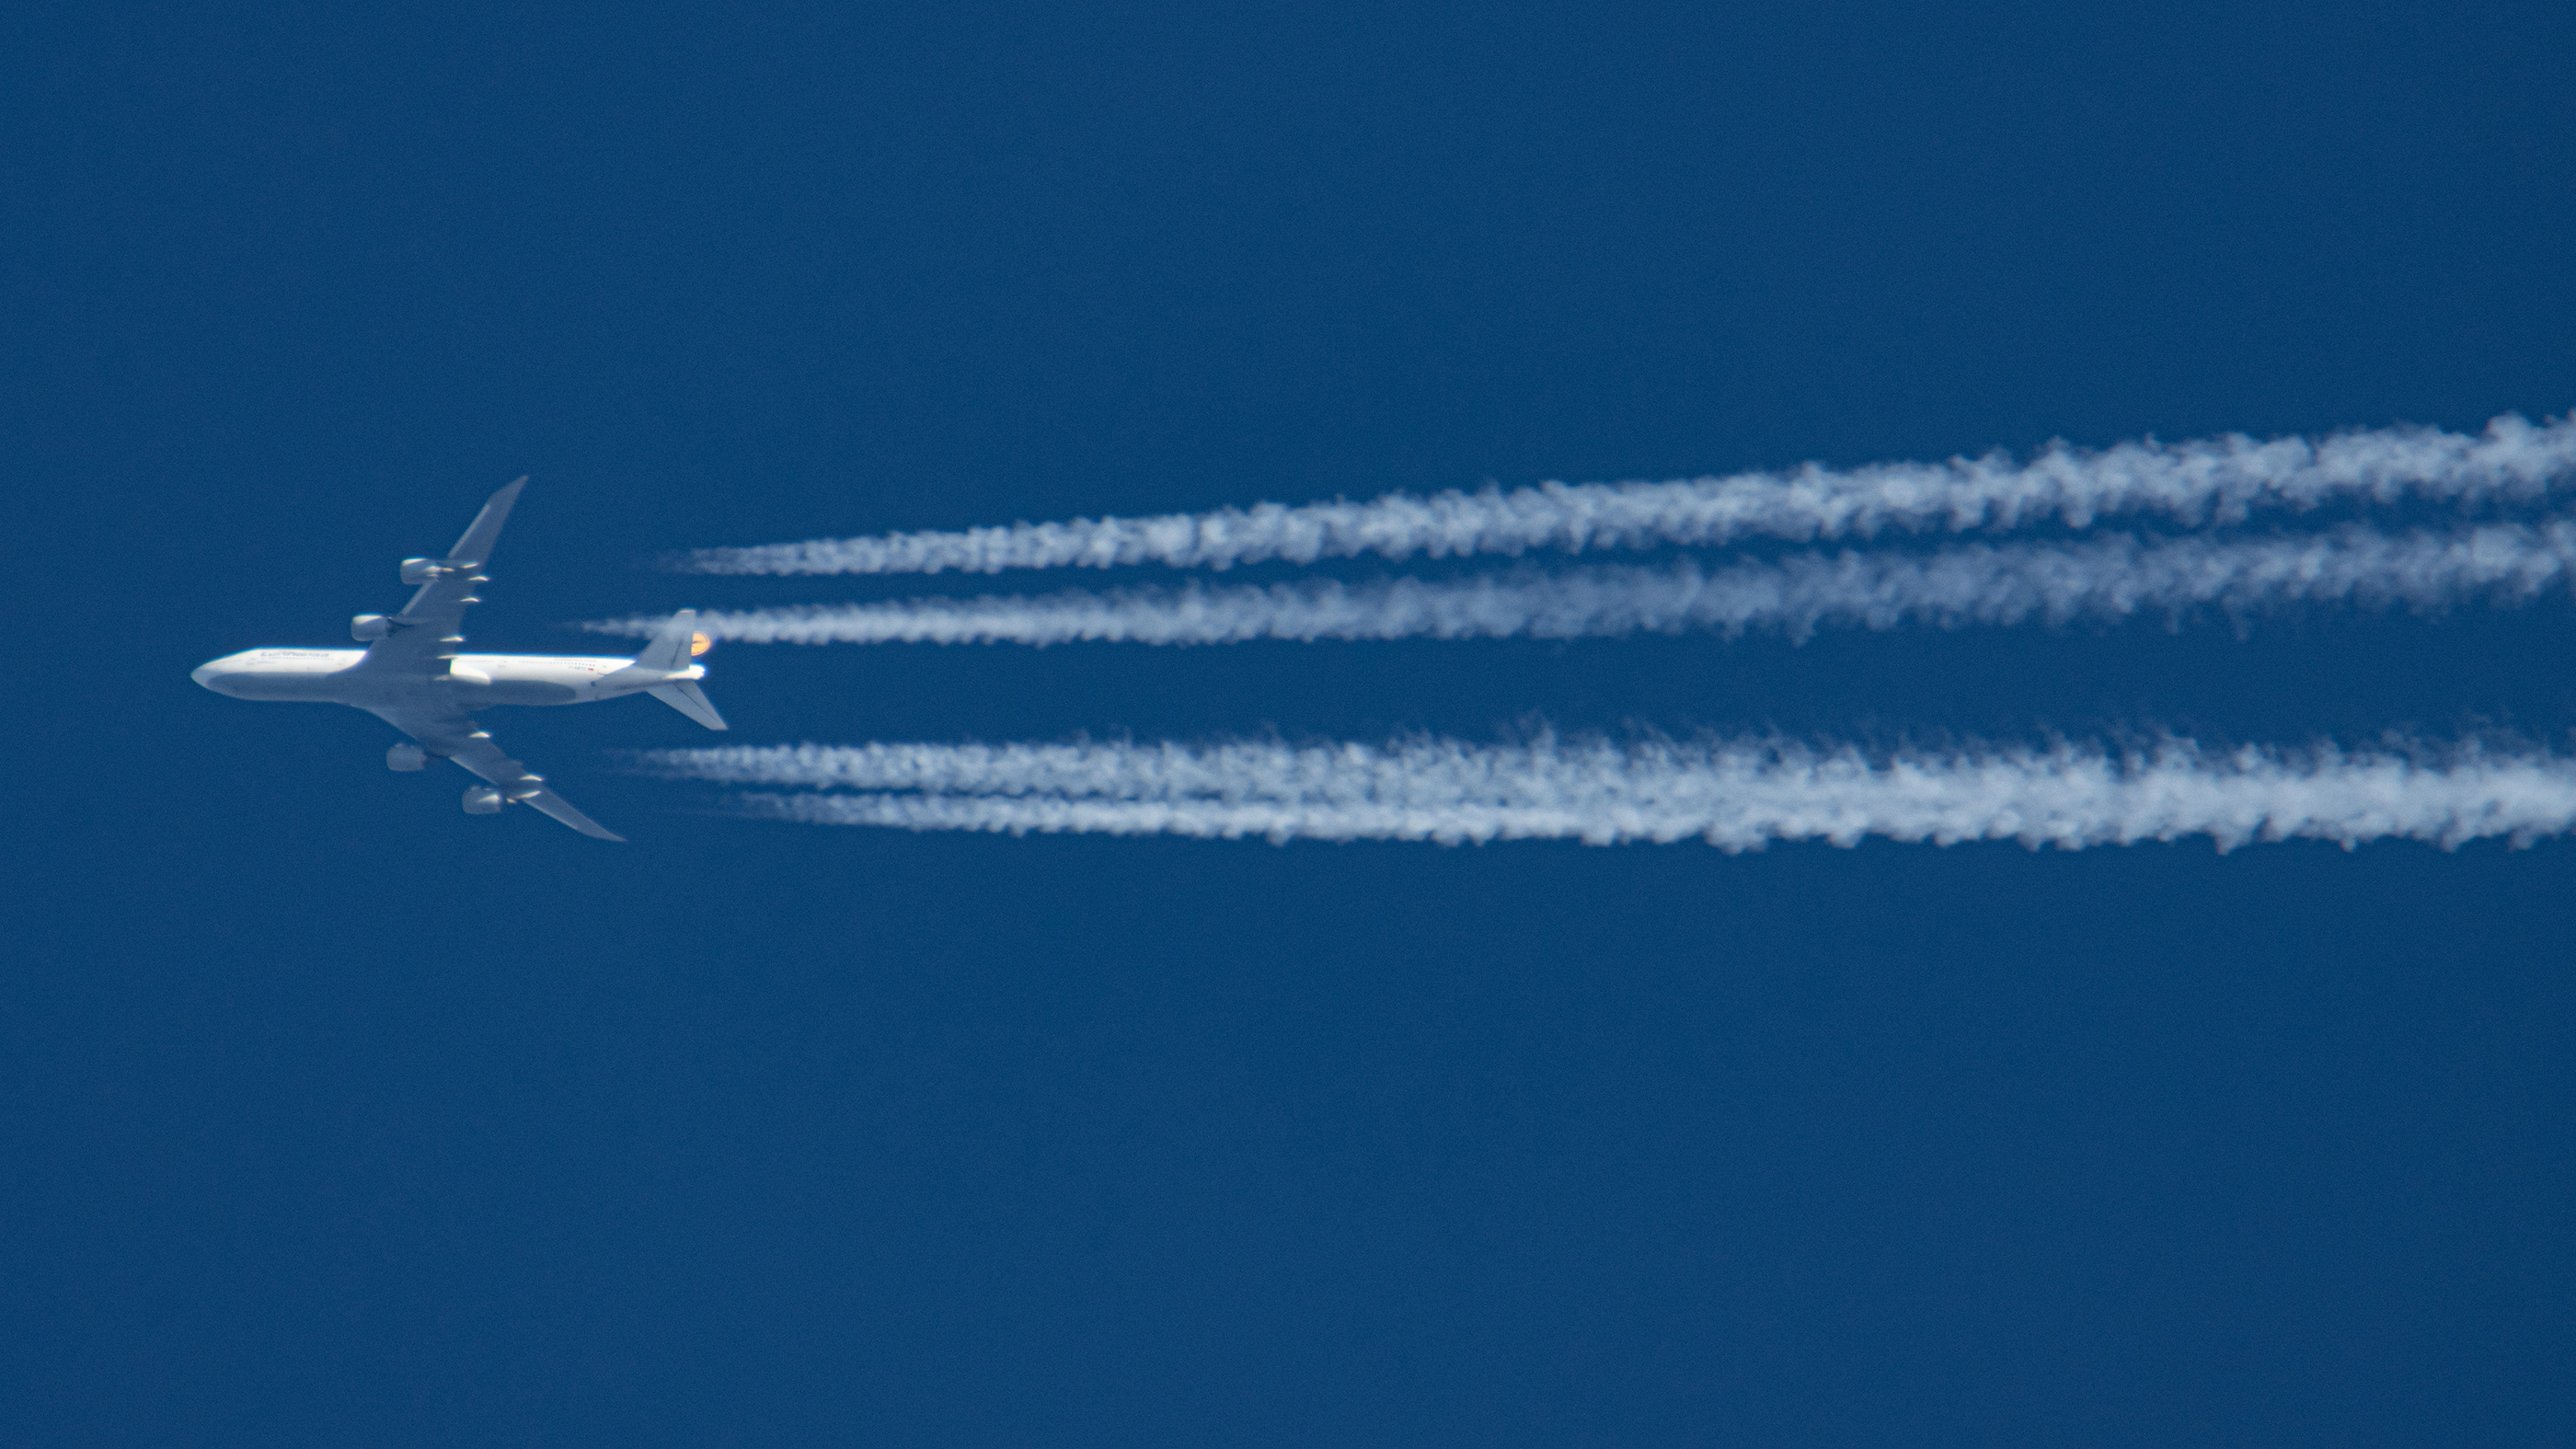 A Lufthansa Boeing 747-8 aircraft spotted flying from Frankfurt FRA airport in Germany to Chicago. The overflying jumbo jet airplane is leaving behind contrails or condensation trail, a white vapor line.